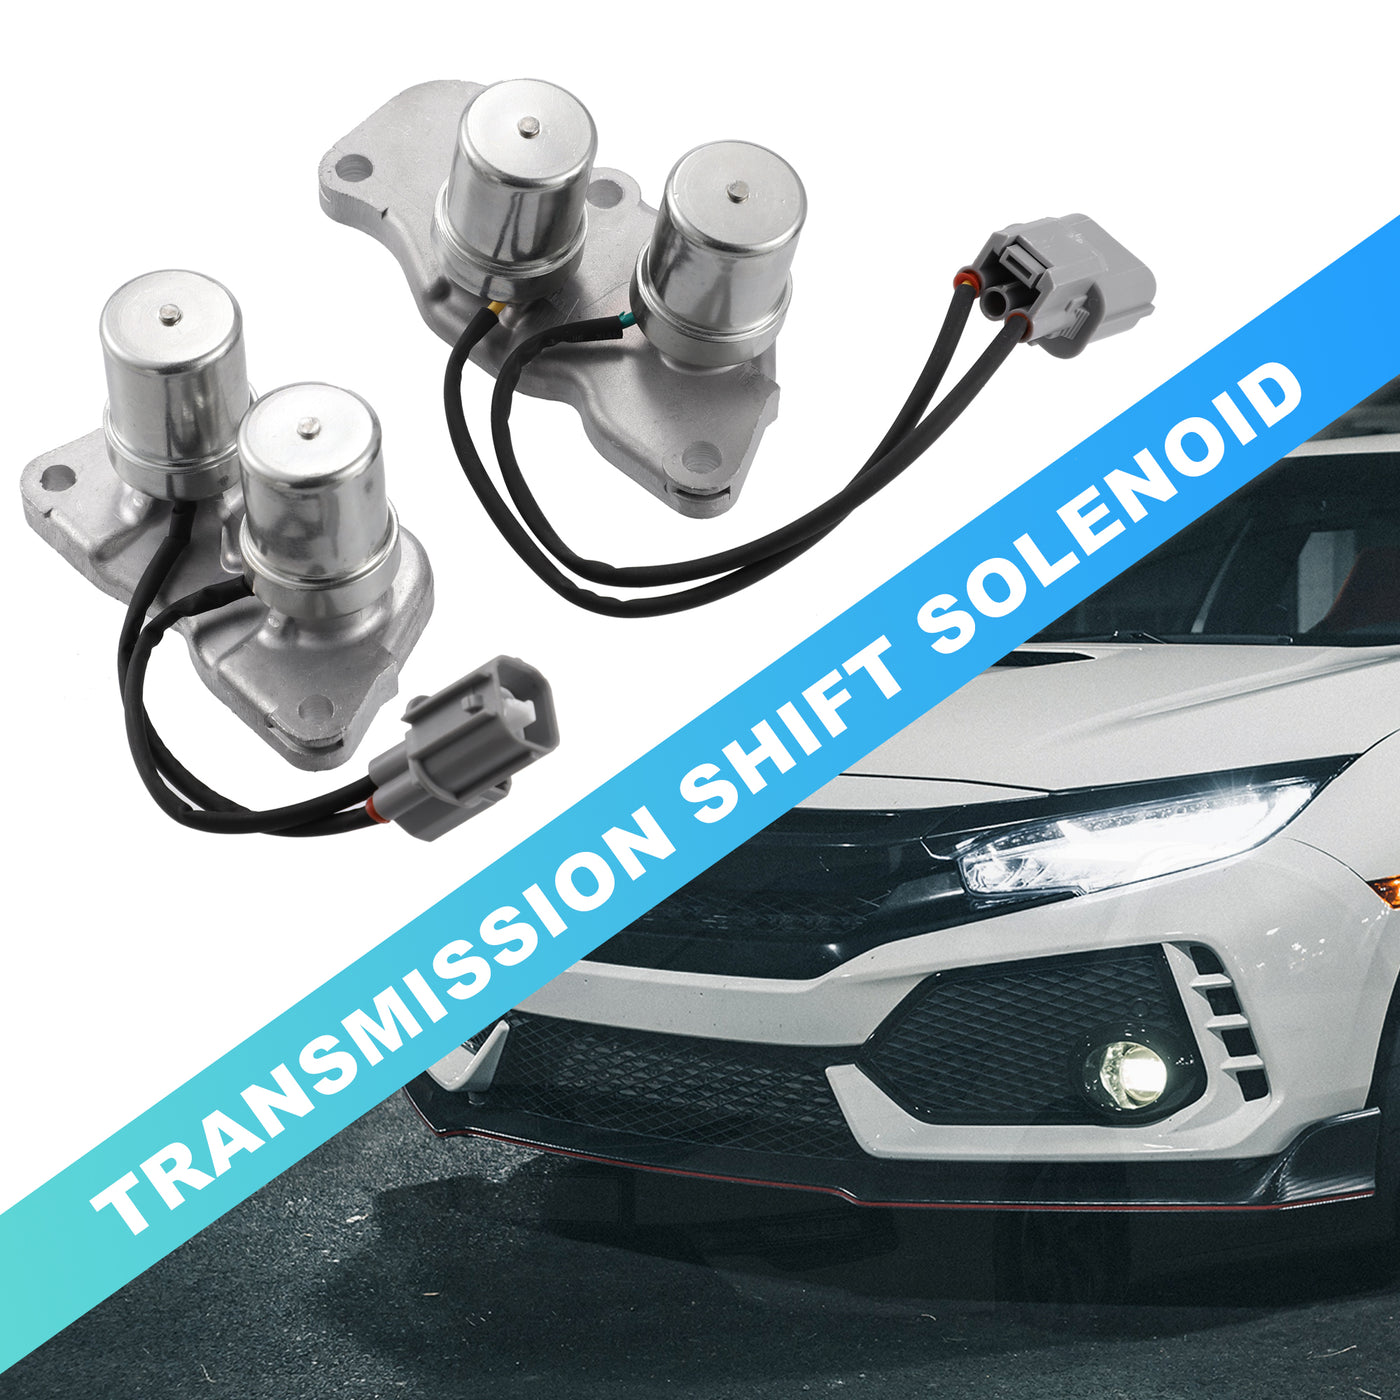 X AUTOHAUX 1 Set 28200-PX4-014 28300-PX4-003 Transmission Shift Solenoid for Honda Accord 1990-1997 for Honda Odyssey 1995-1997 for Honda Prelude 1992-1996